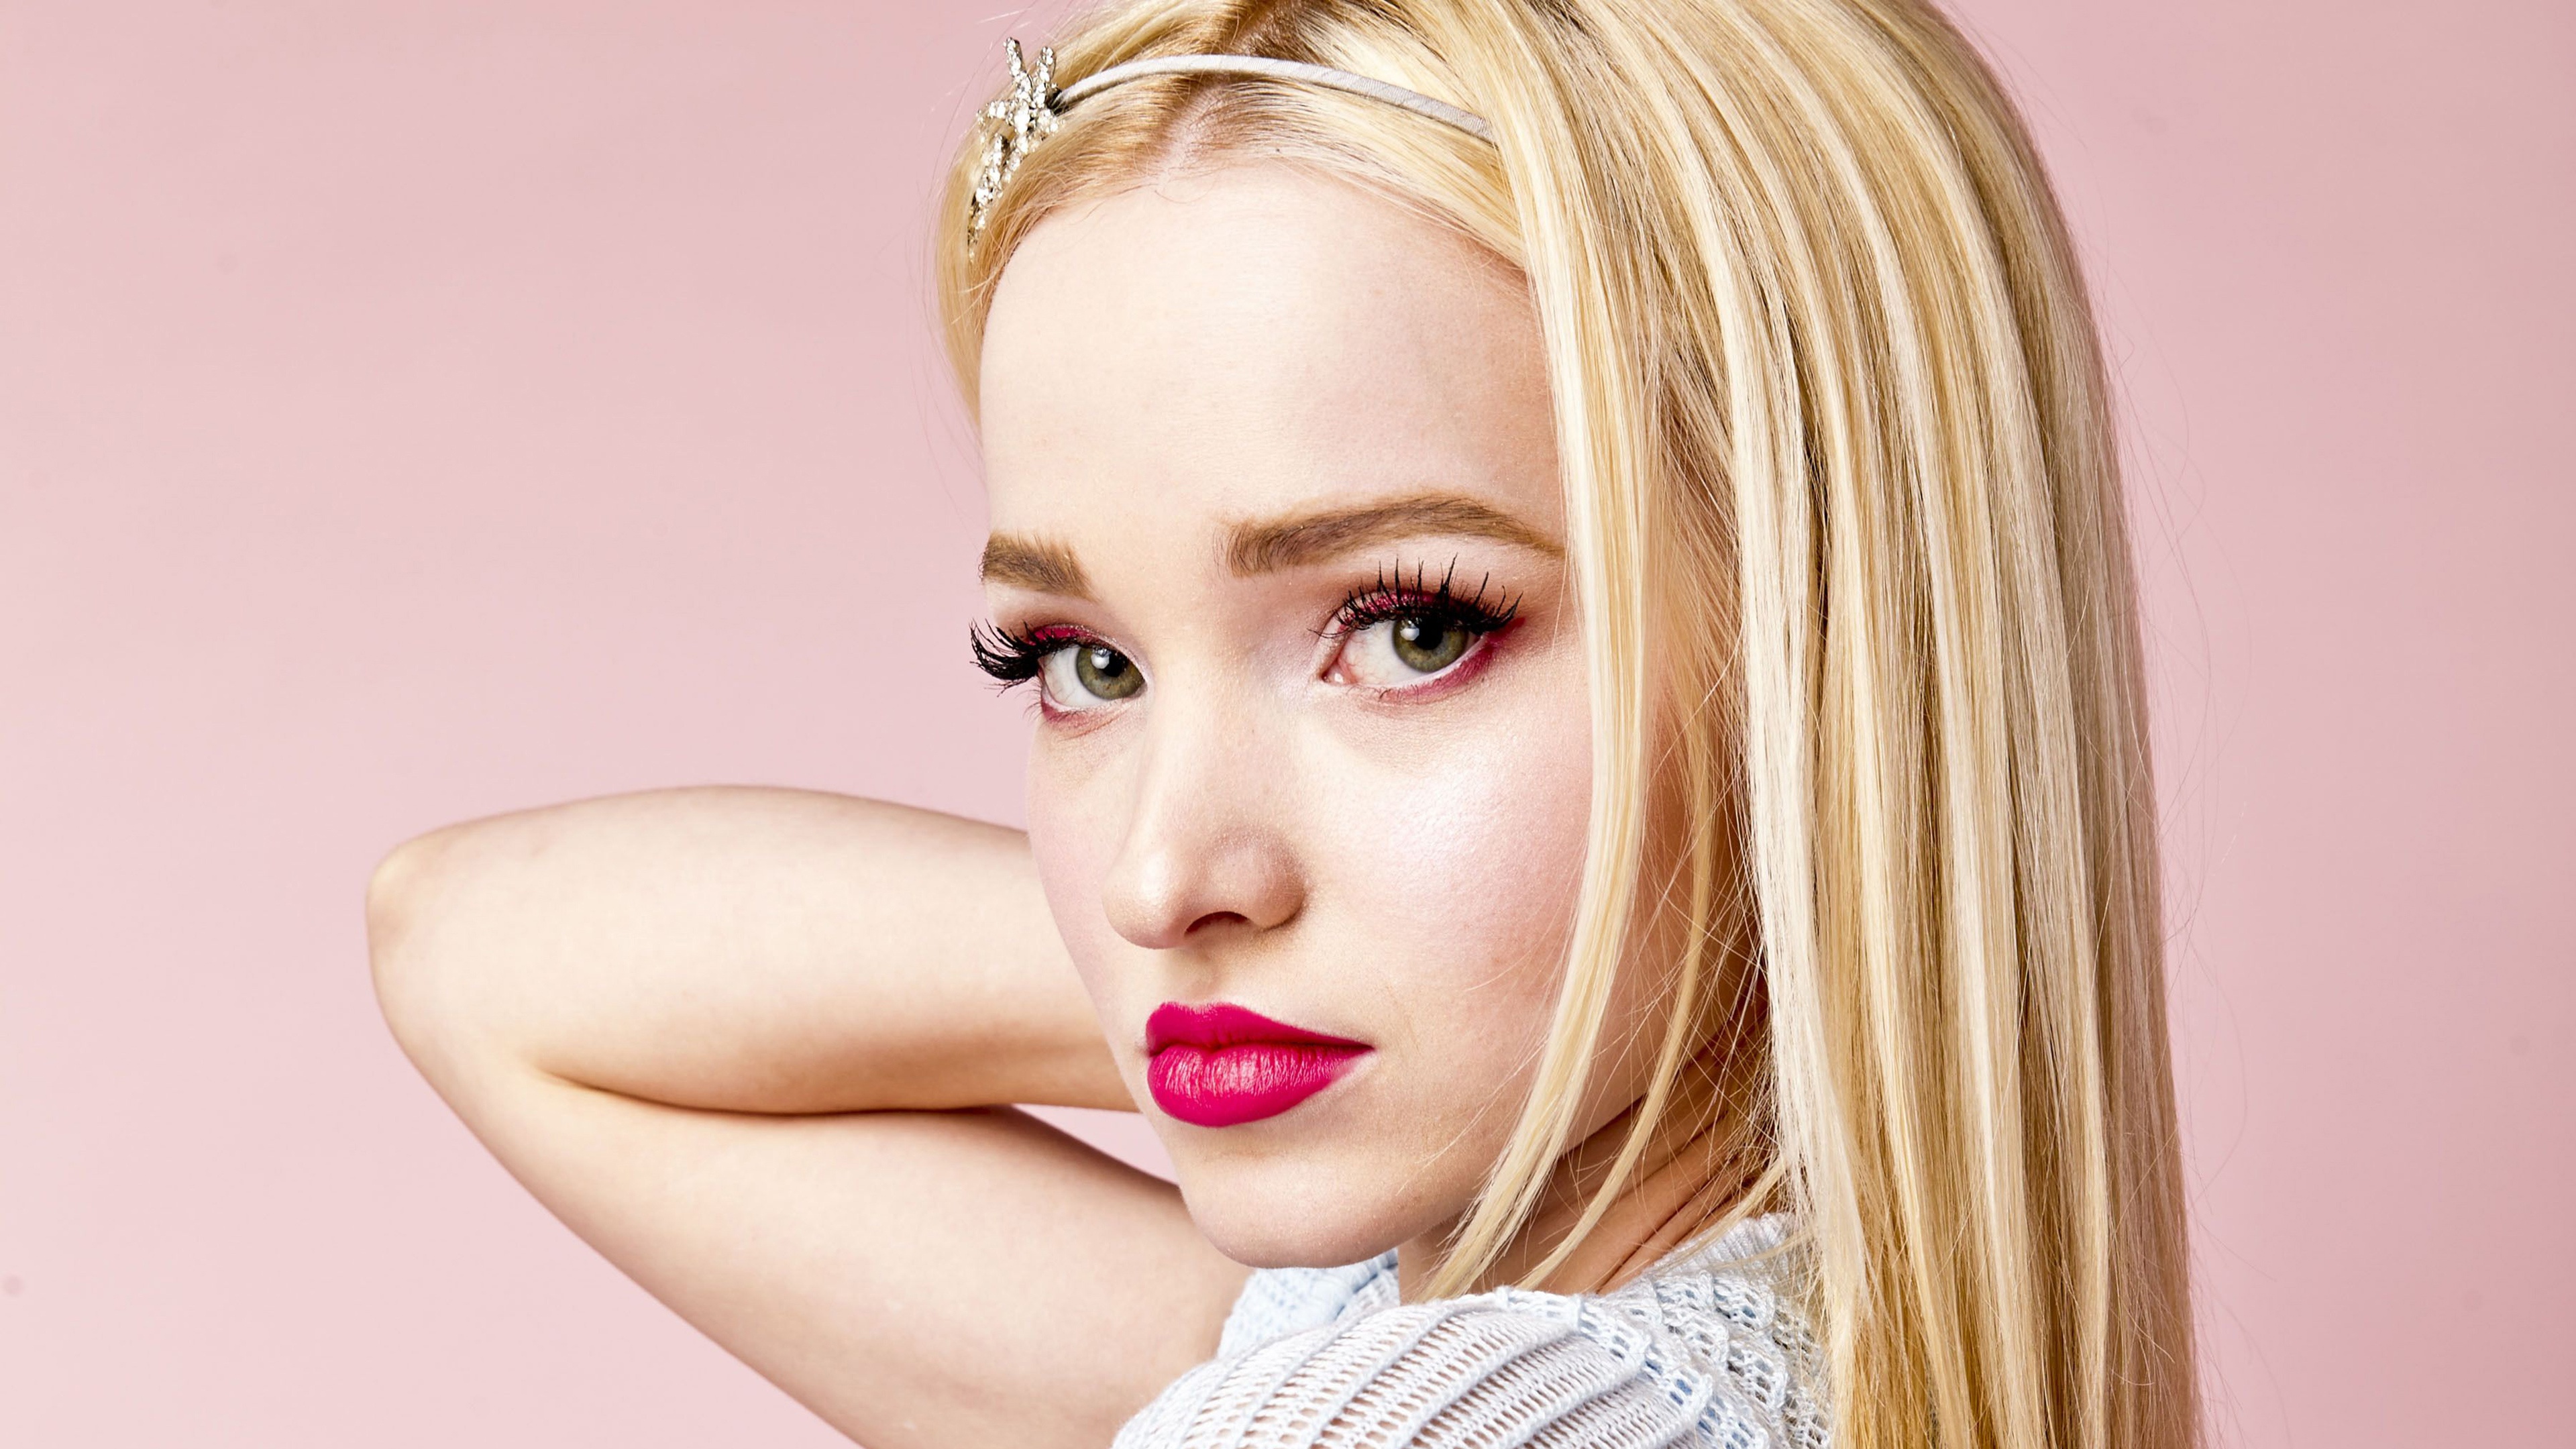 Dove Cameron for TIGER BEAT Magazine, Summer 2016 by Brian Lowe